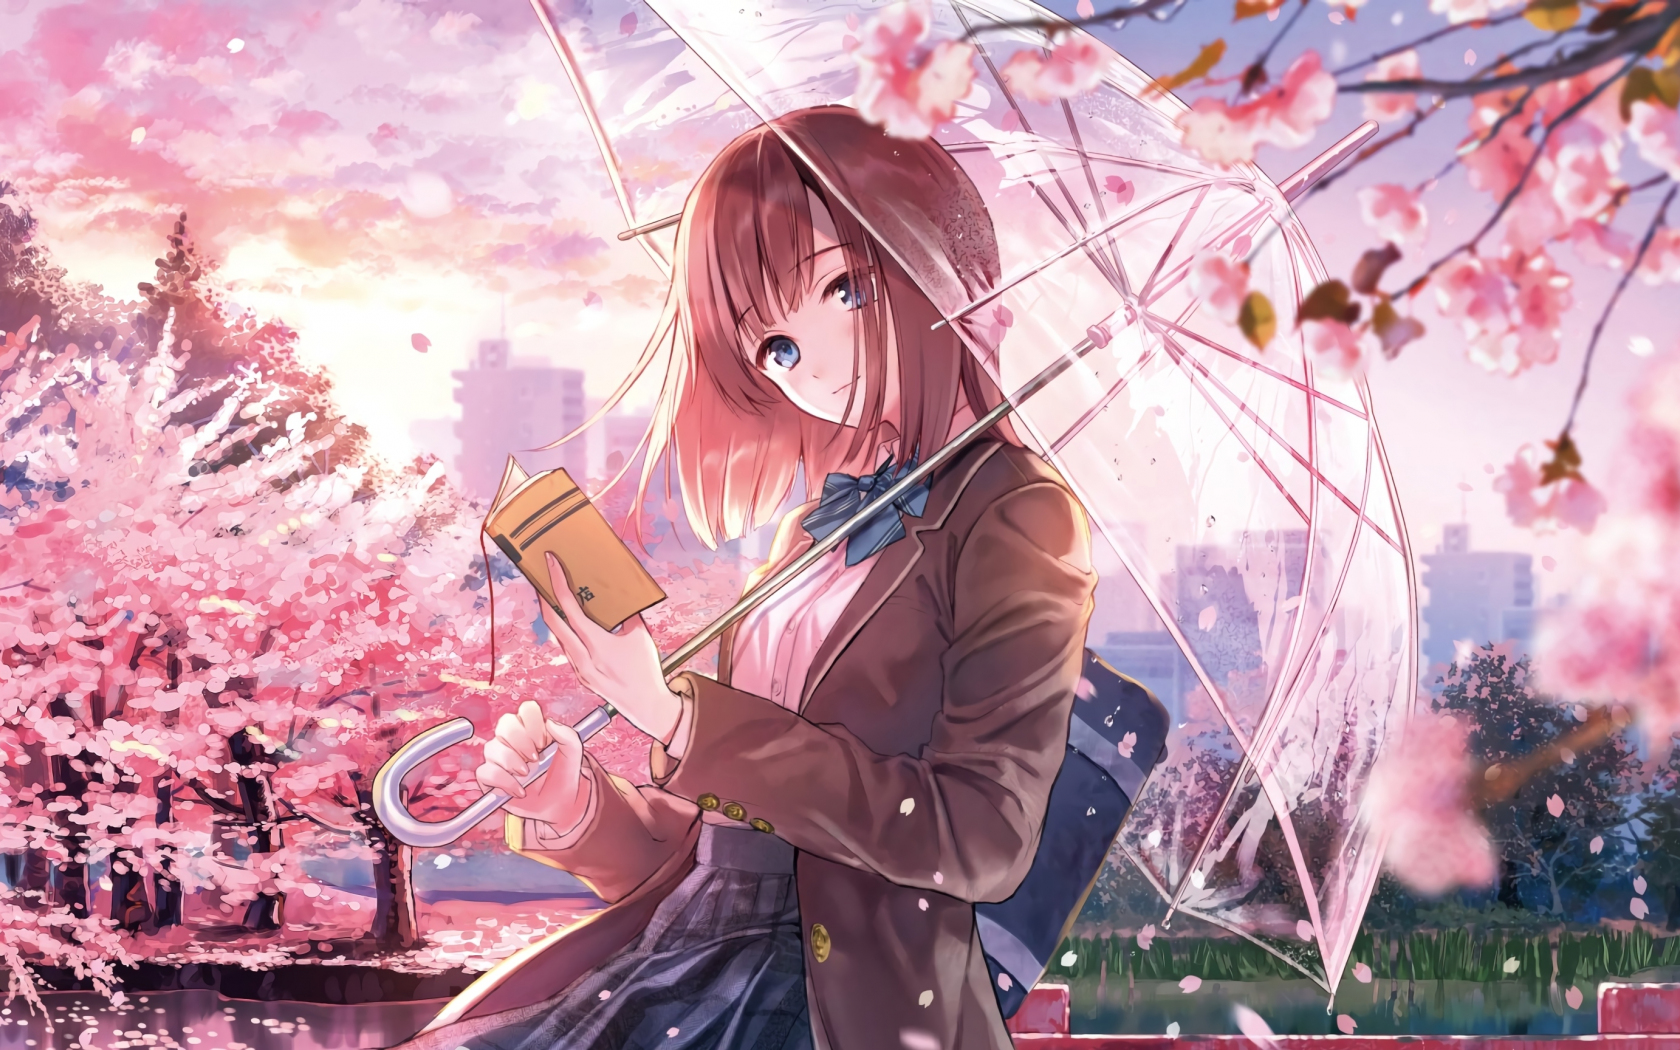 Download wallpaper 1680x1050 blossom, anime girl, beautiful, 16:10  widescreen 1680x1050 hd background, 24311